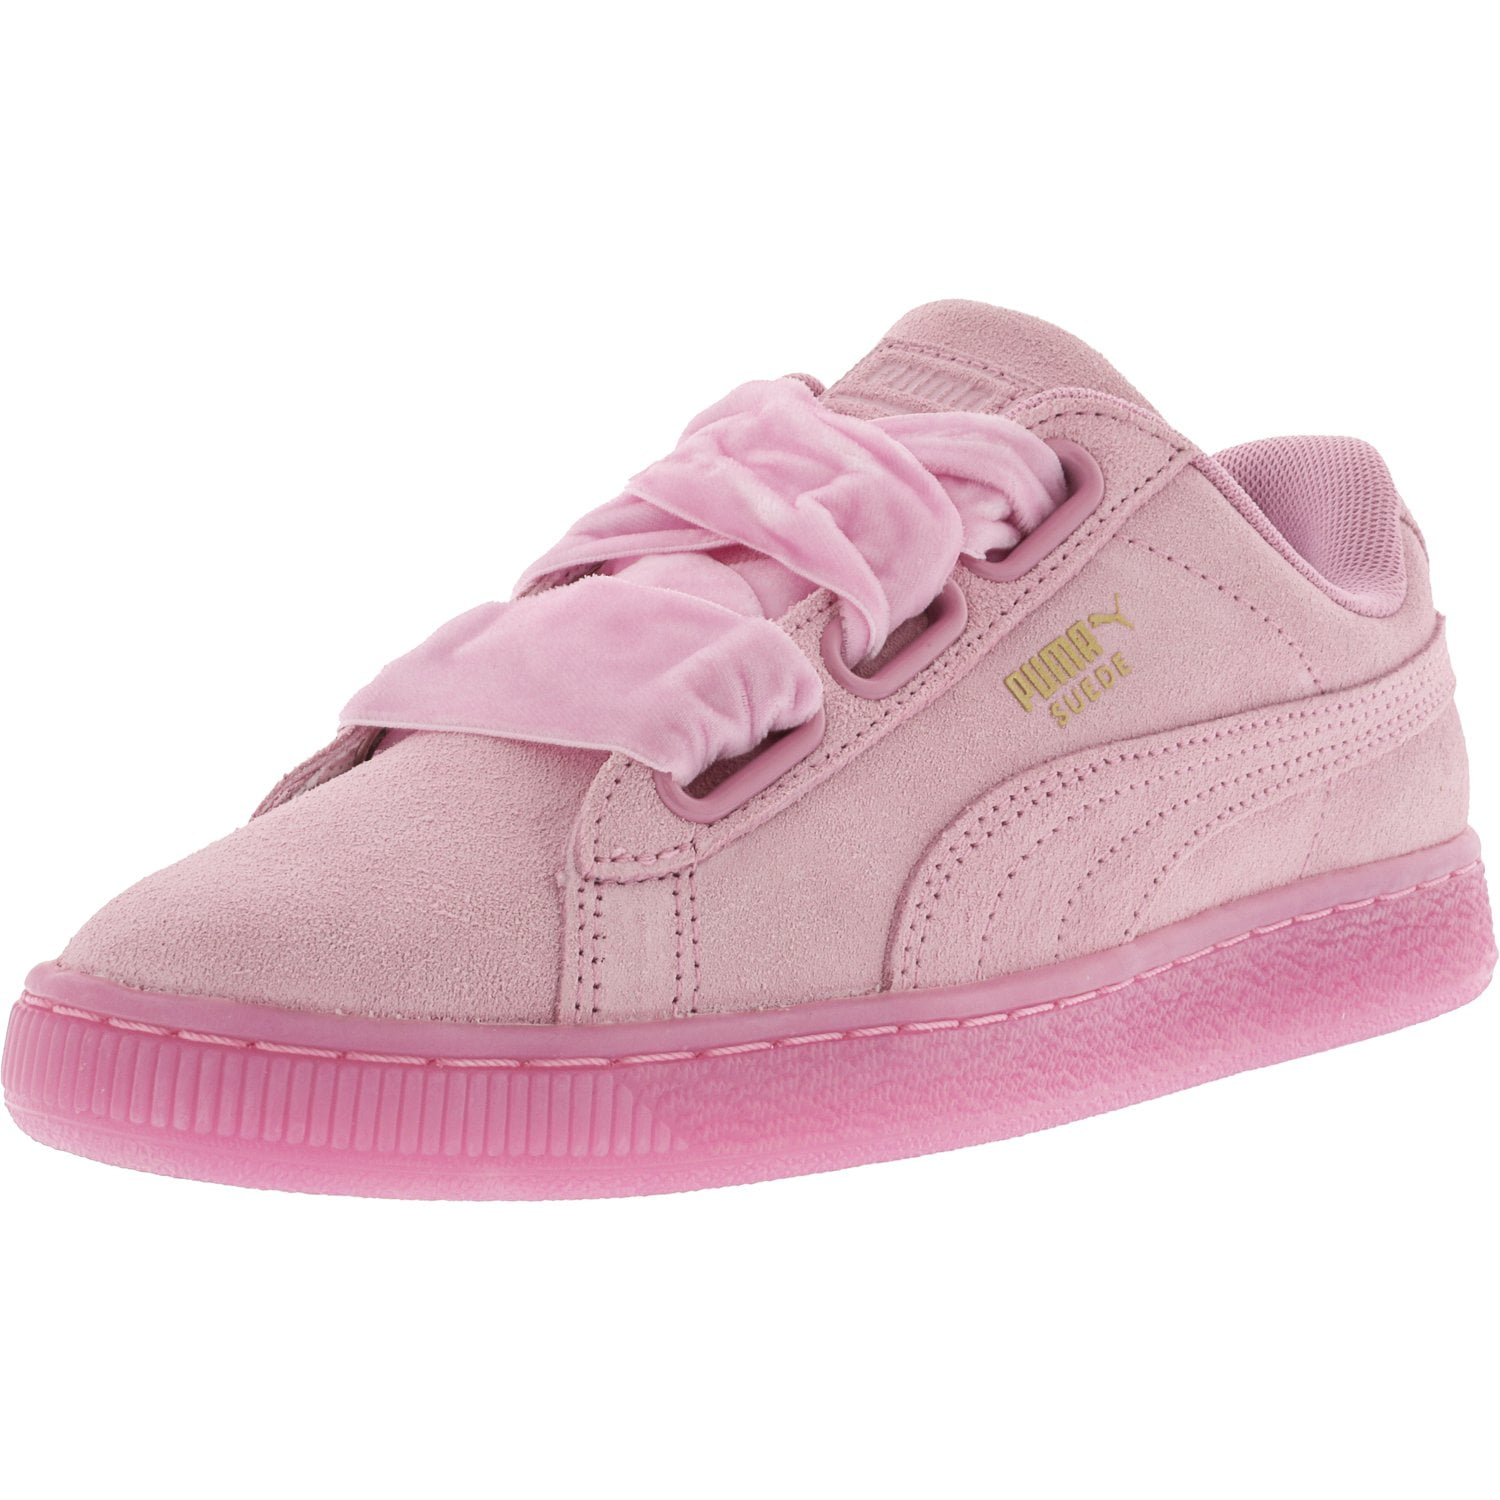 Puma Reset / - Sneaker Ankle-High Fashion Women\'s 7.5M Pink Prism Suede Heart